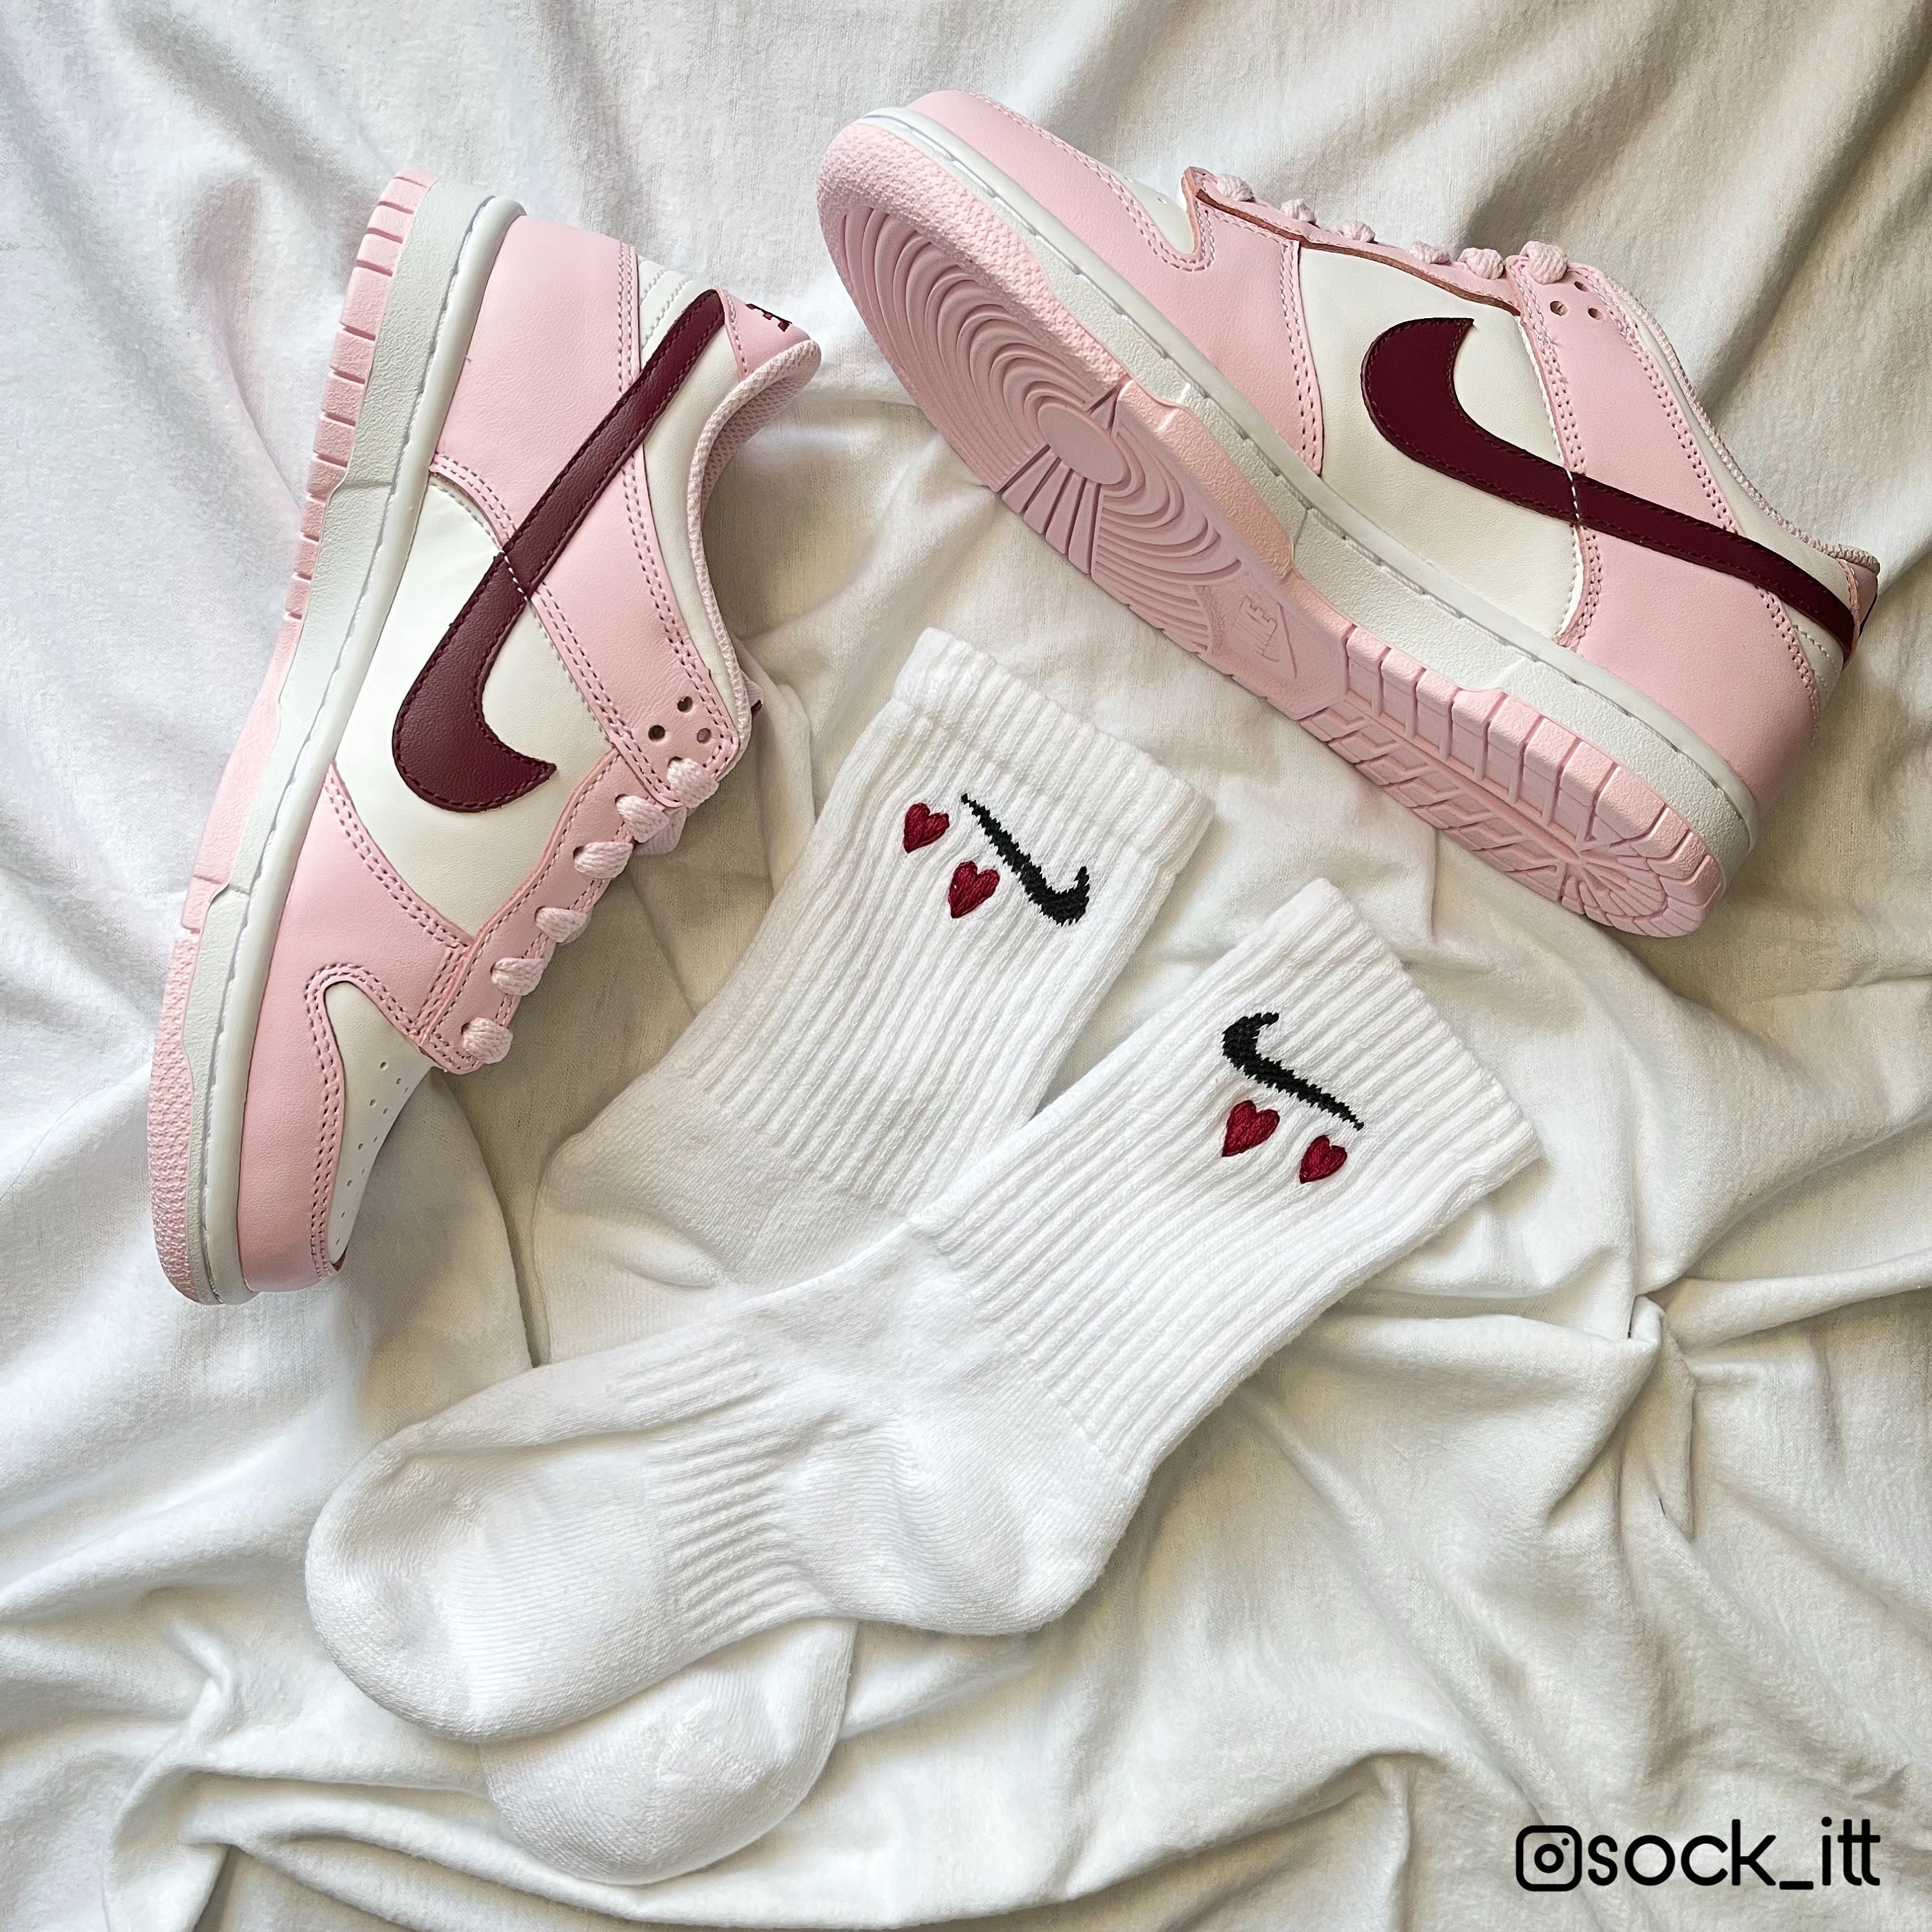 Pin by Onze on bags&shoes  Fashion socks, Parisian chic style, Cute nike  outfits